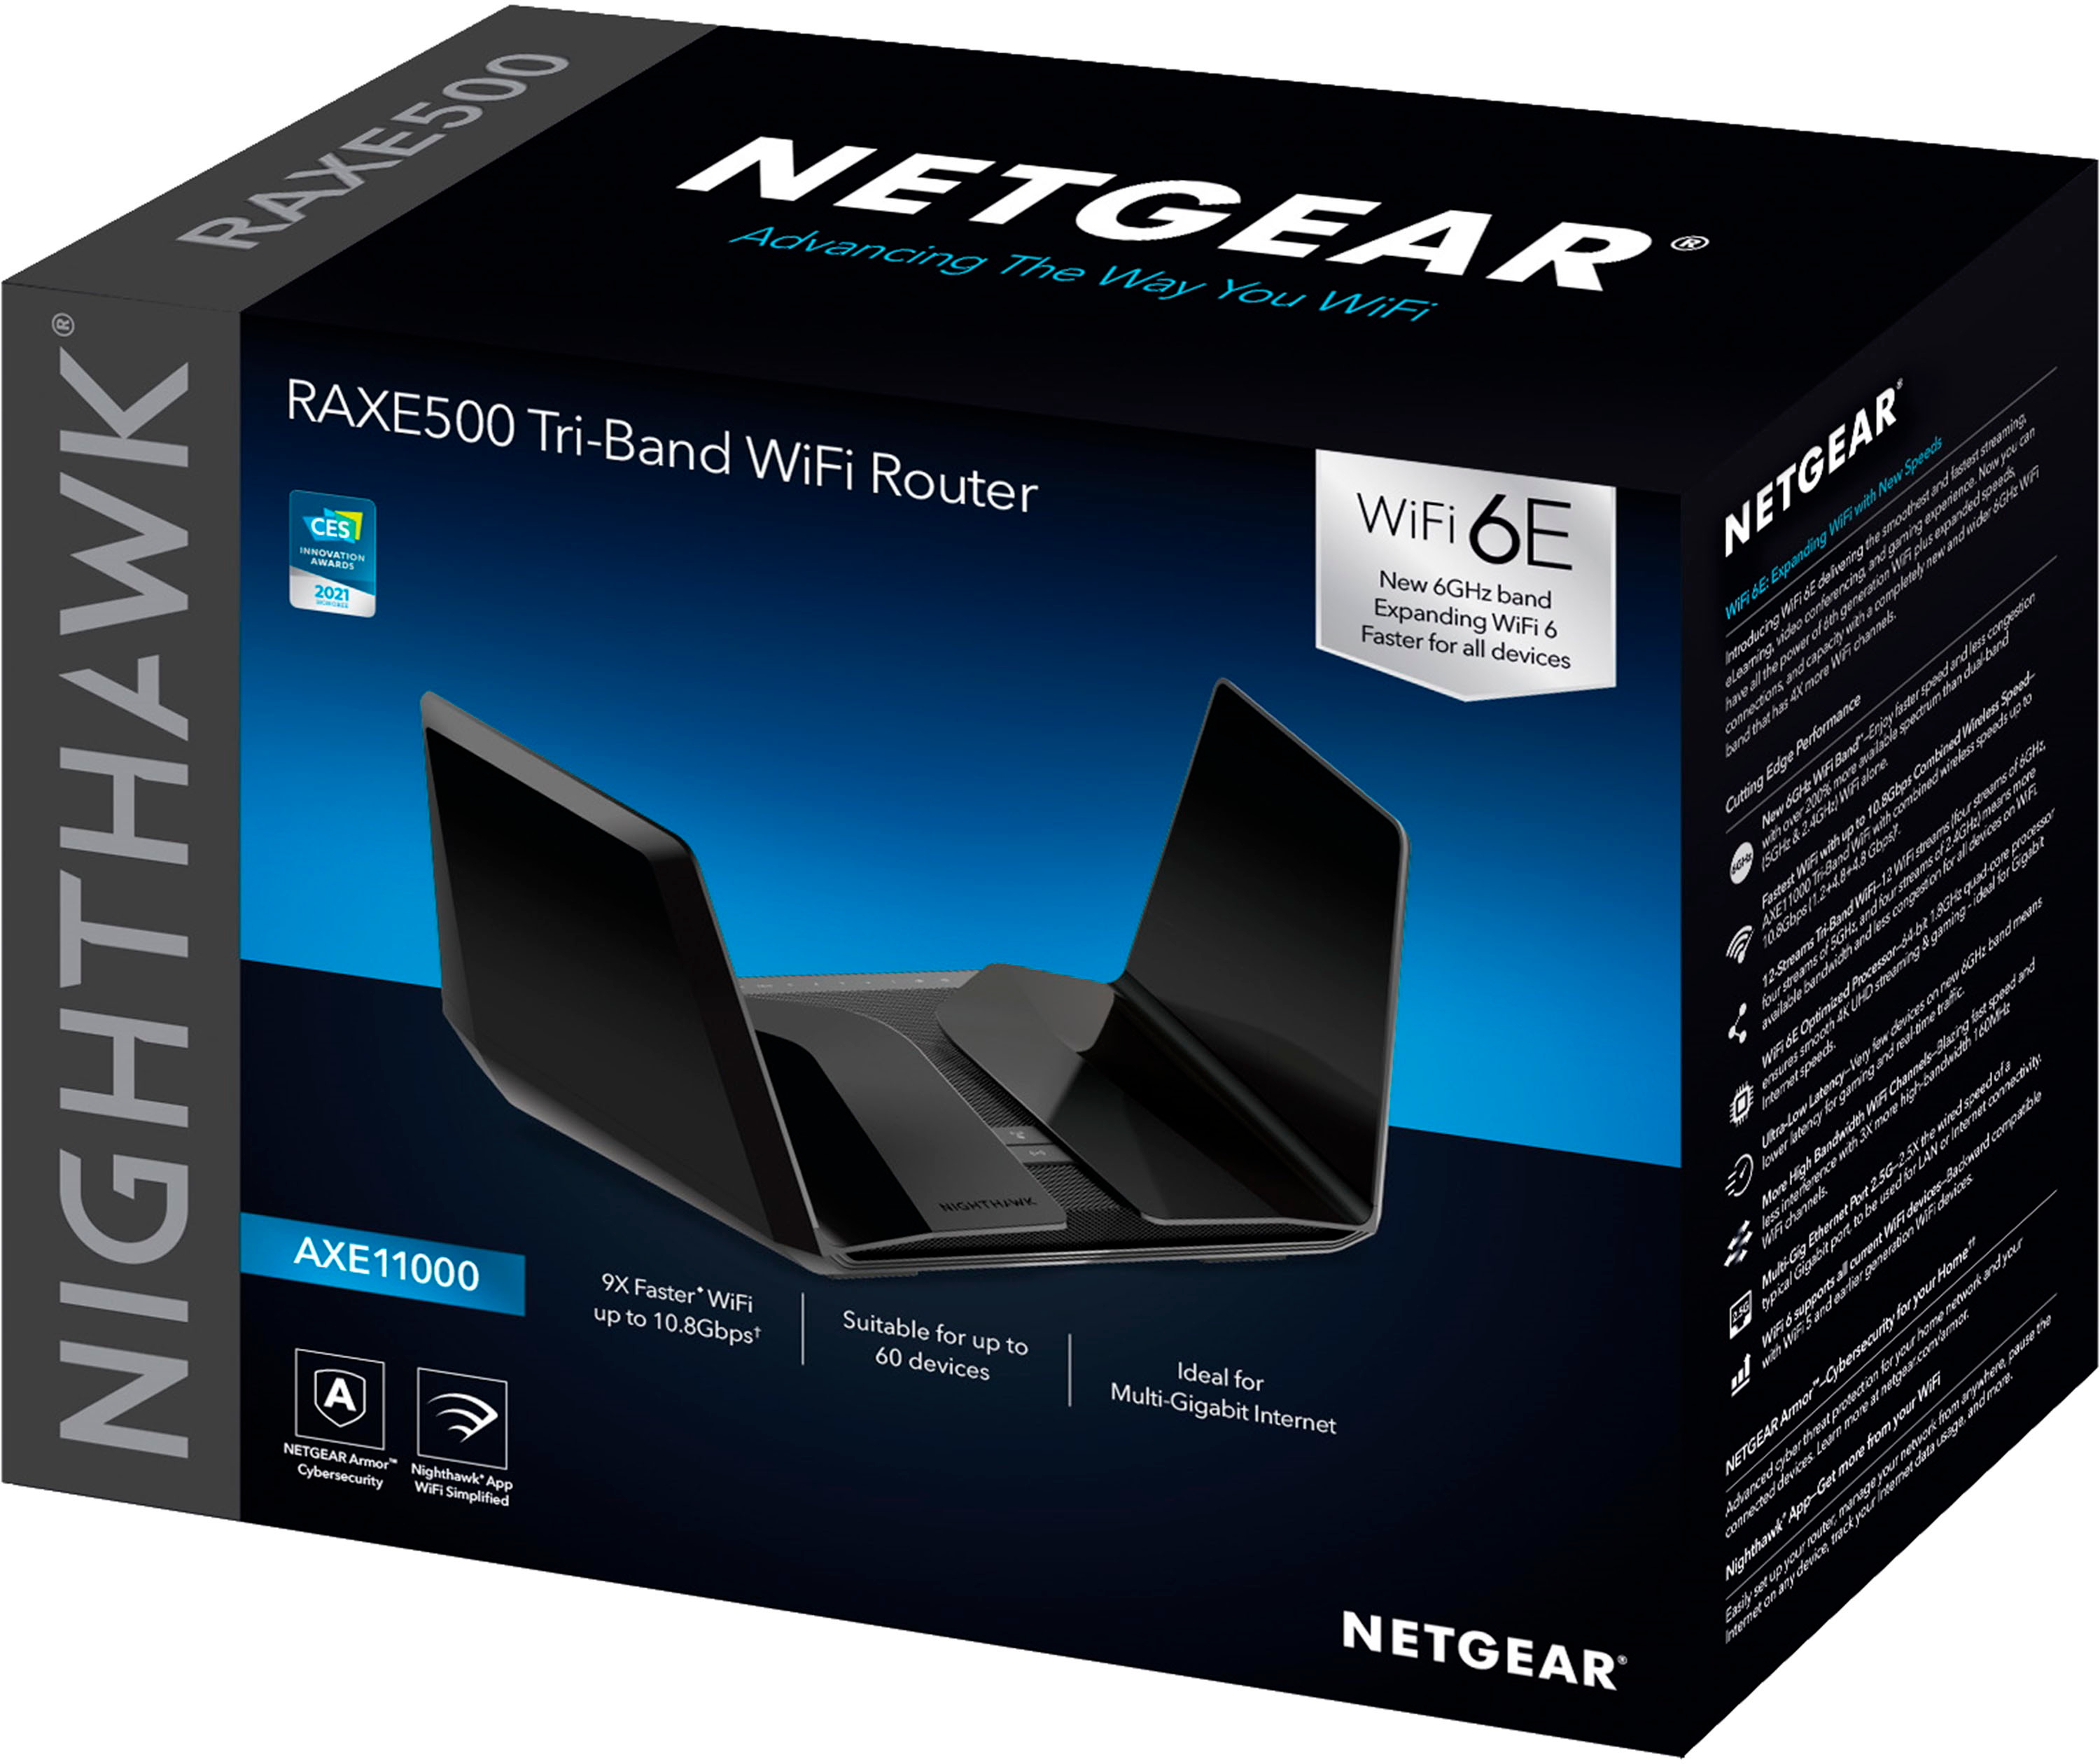 NETGEAR Nighthawk RAXE500 vs. RAX200: Which Router Is Right for